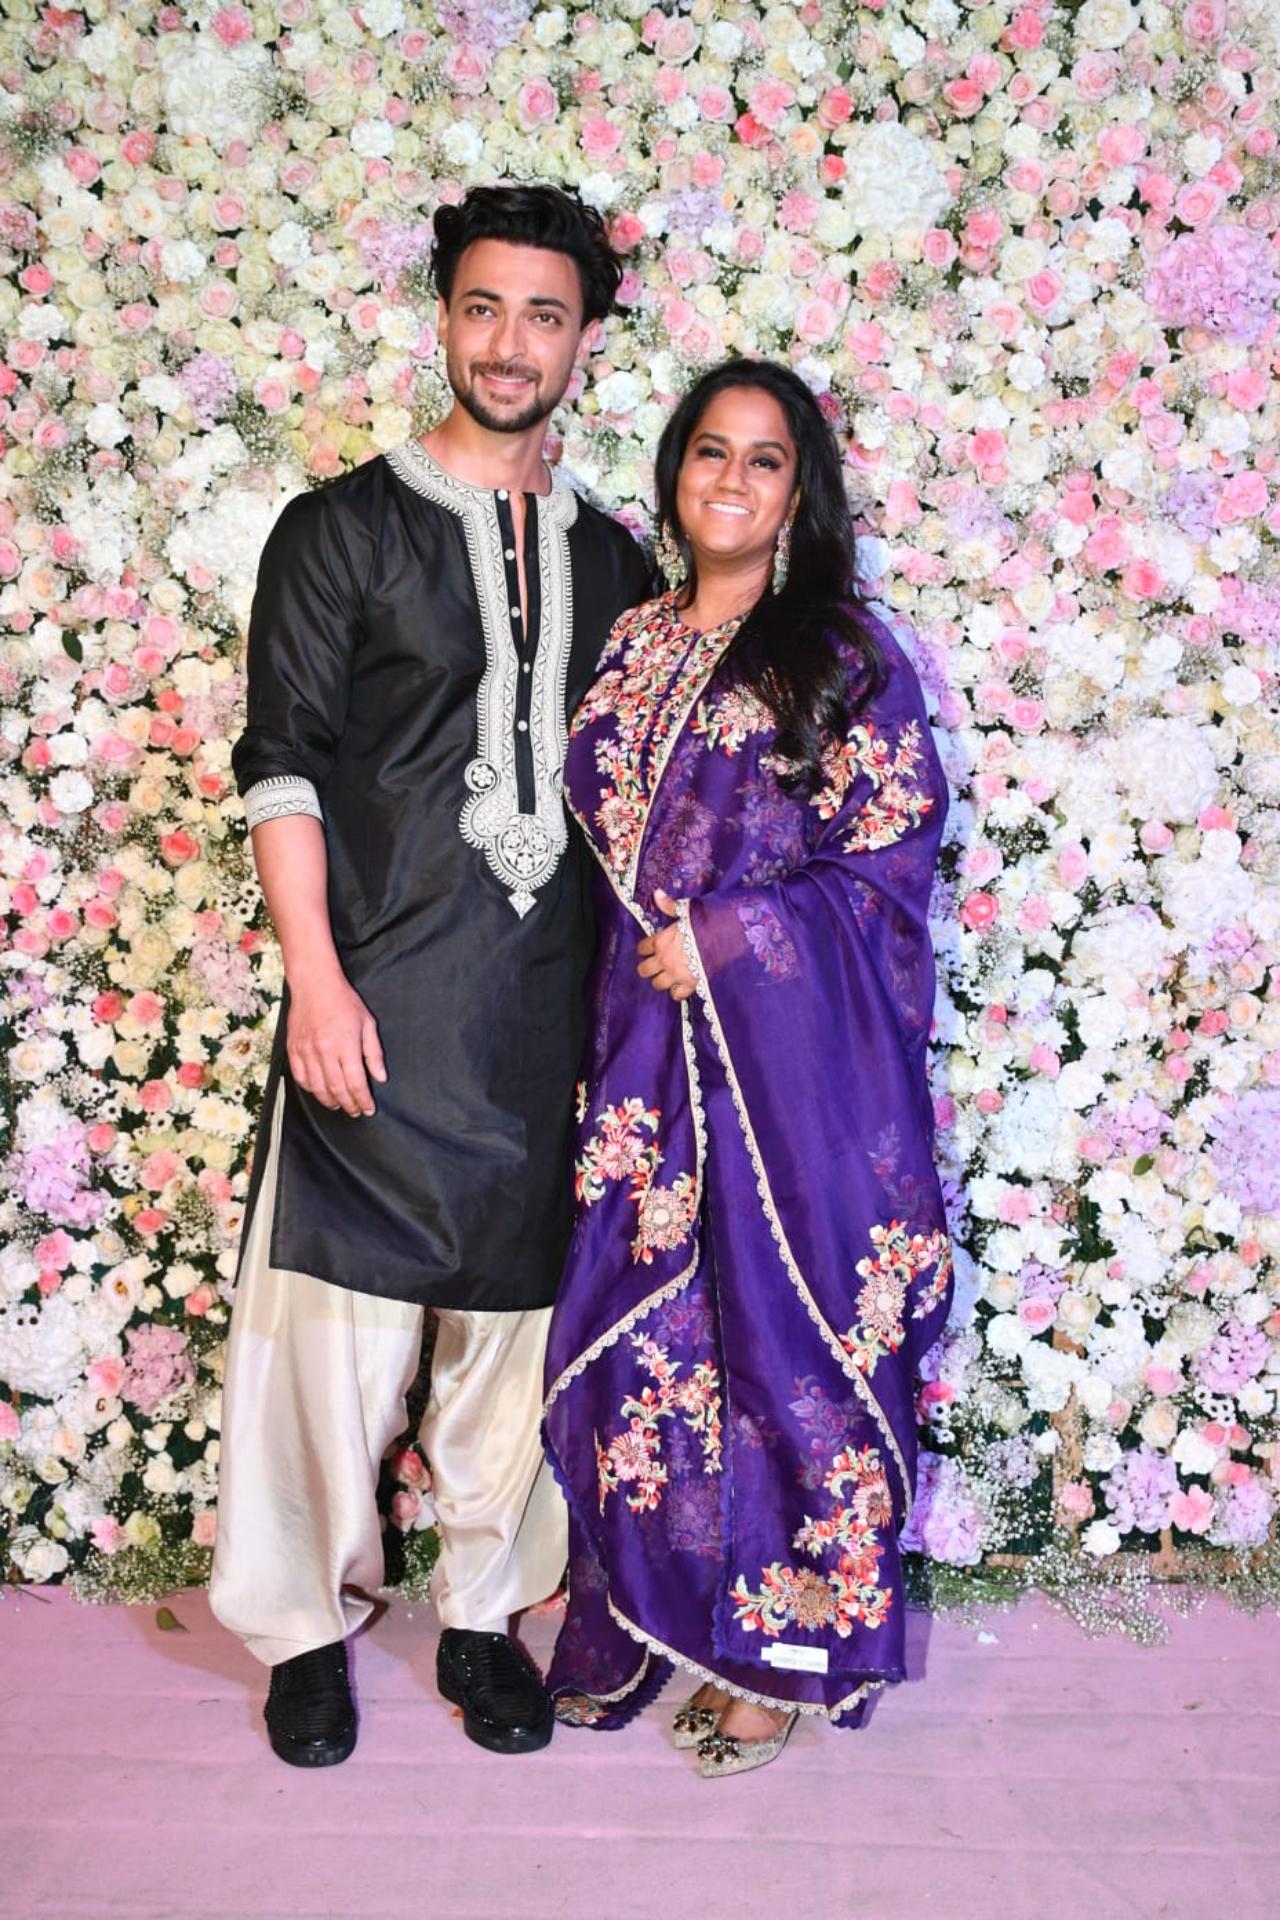 Hosts Aayush Sharma and Arpita Khan were all smiles for the paparazzi as they stepped out in traditional wear to greet the photographers